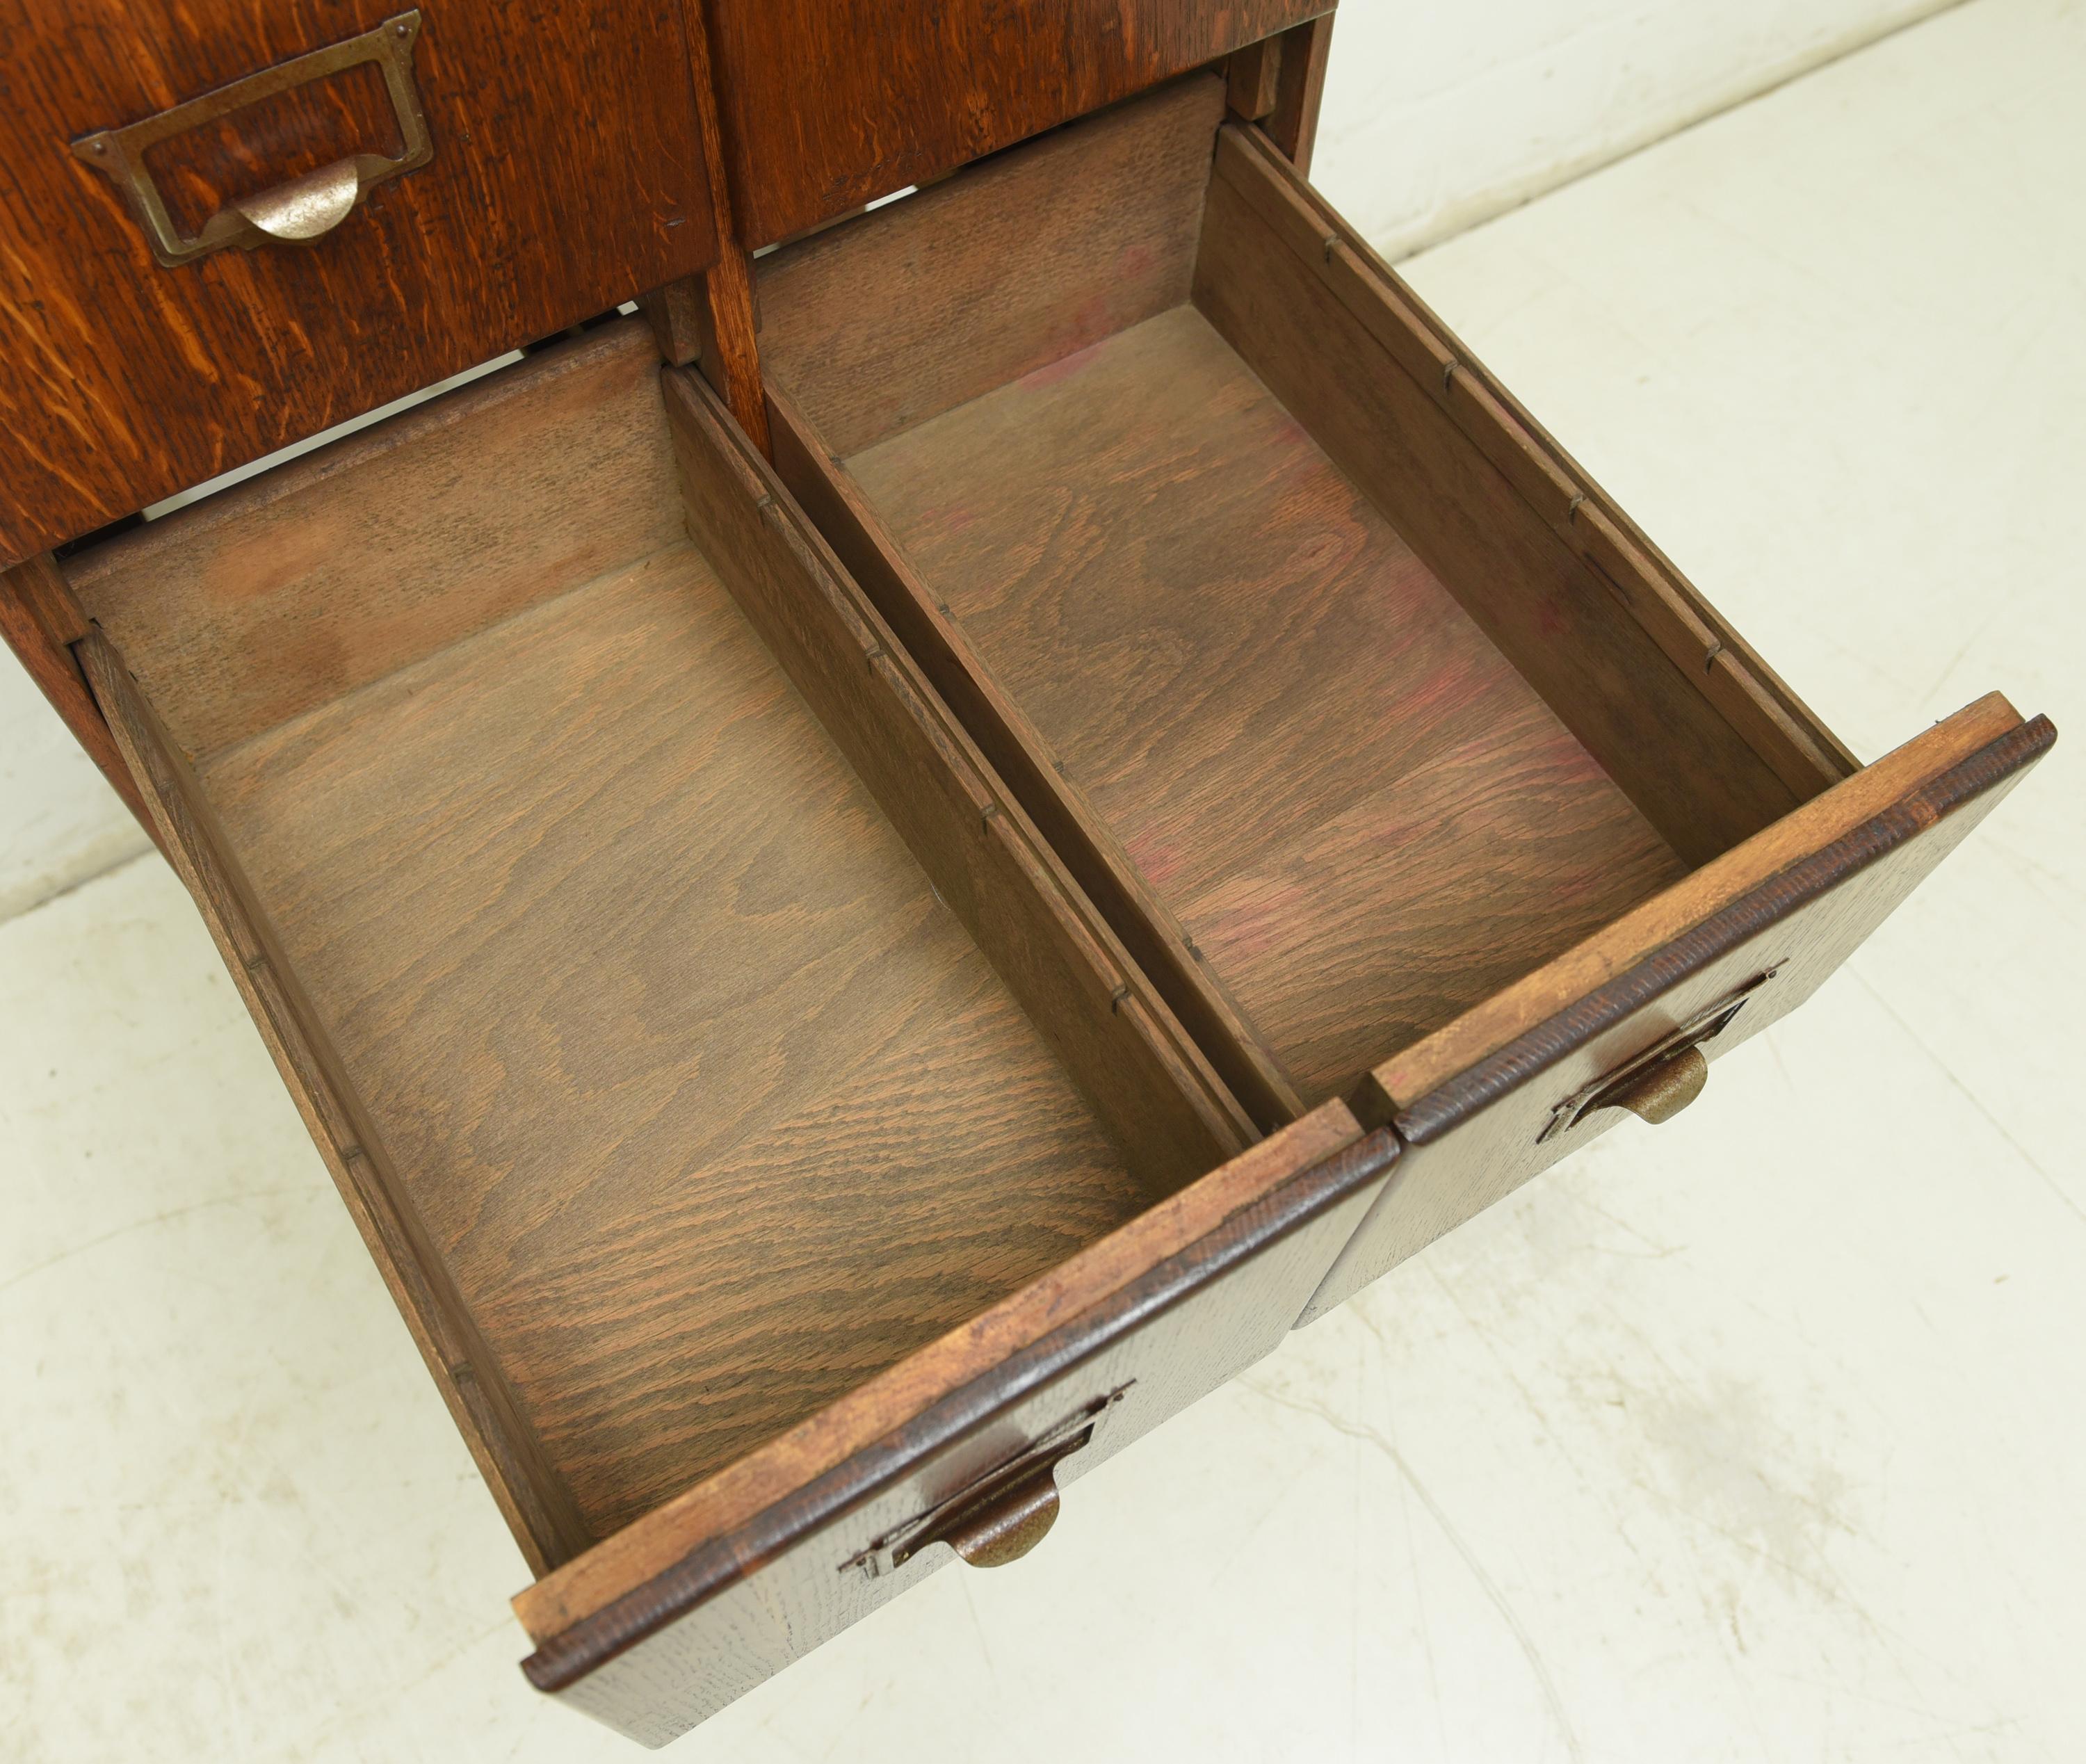 Oak Art Deco Small Drawer Cabinet / Filing Cabinet by Zeiss, 1925